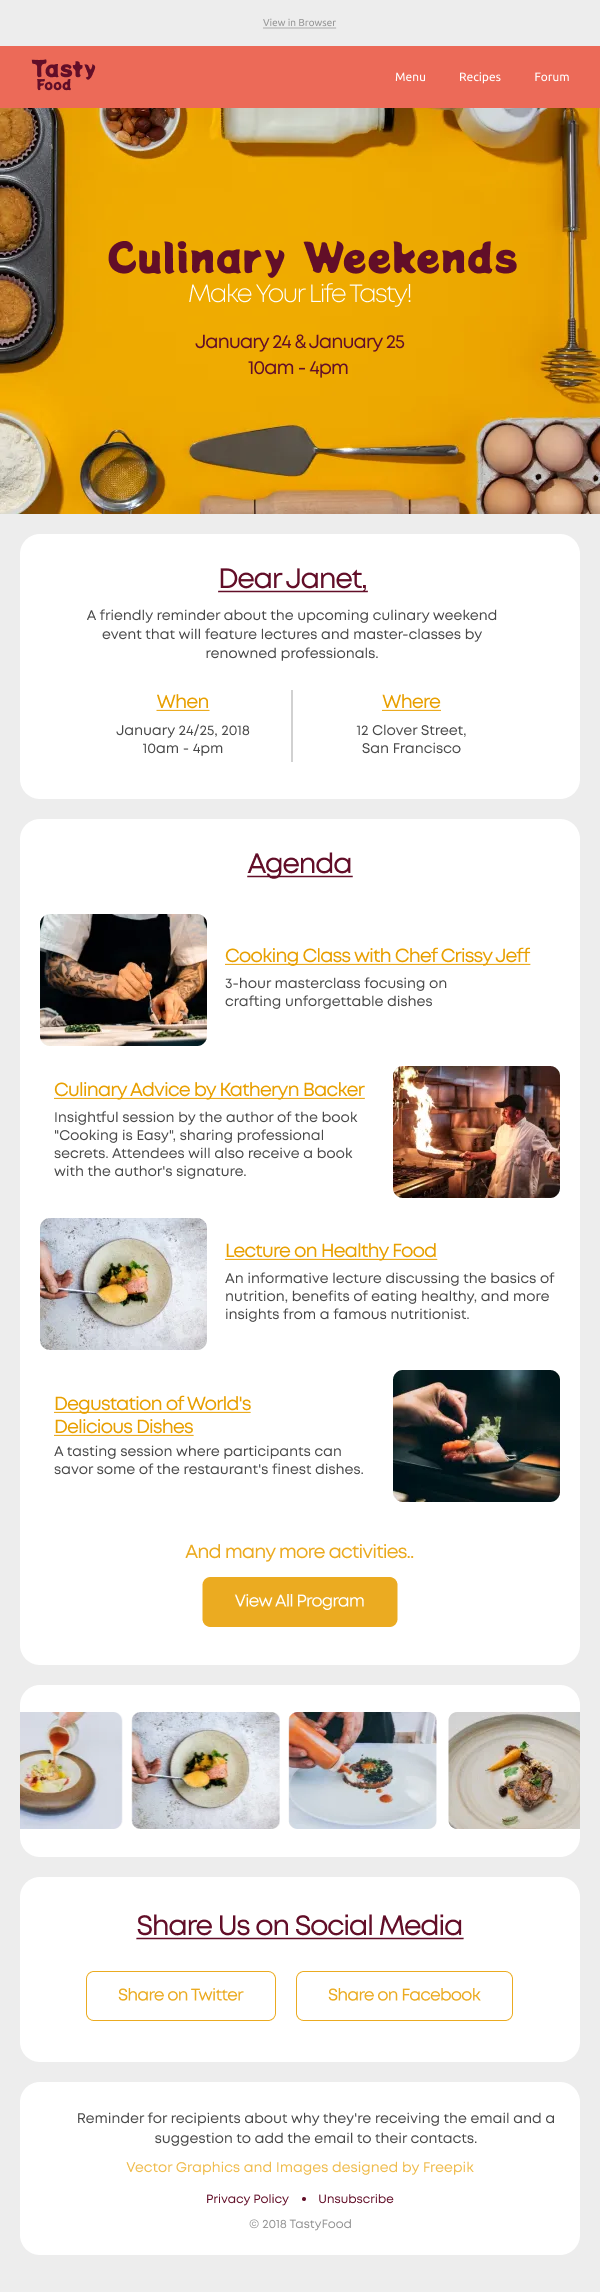 Restaurant-Culinary Weekends Classes